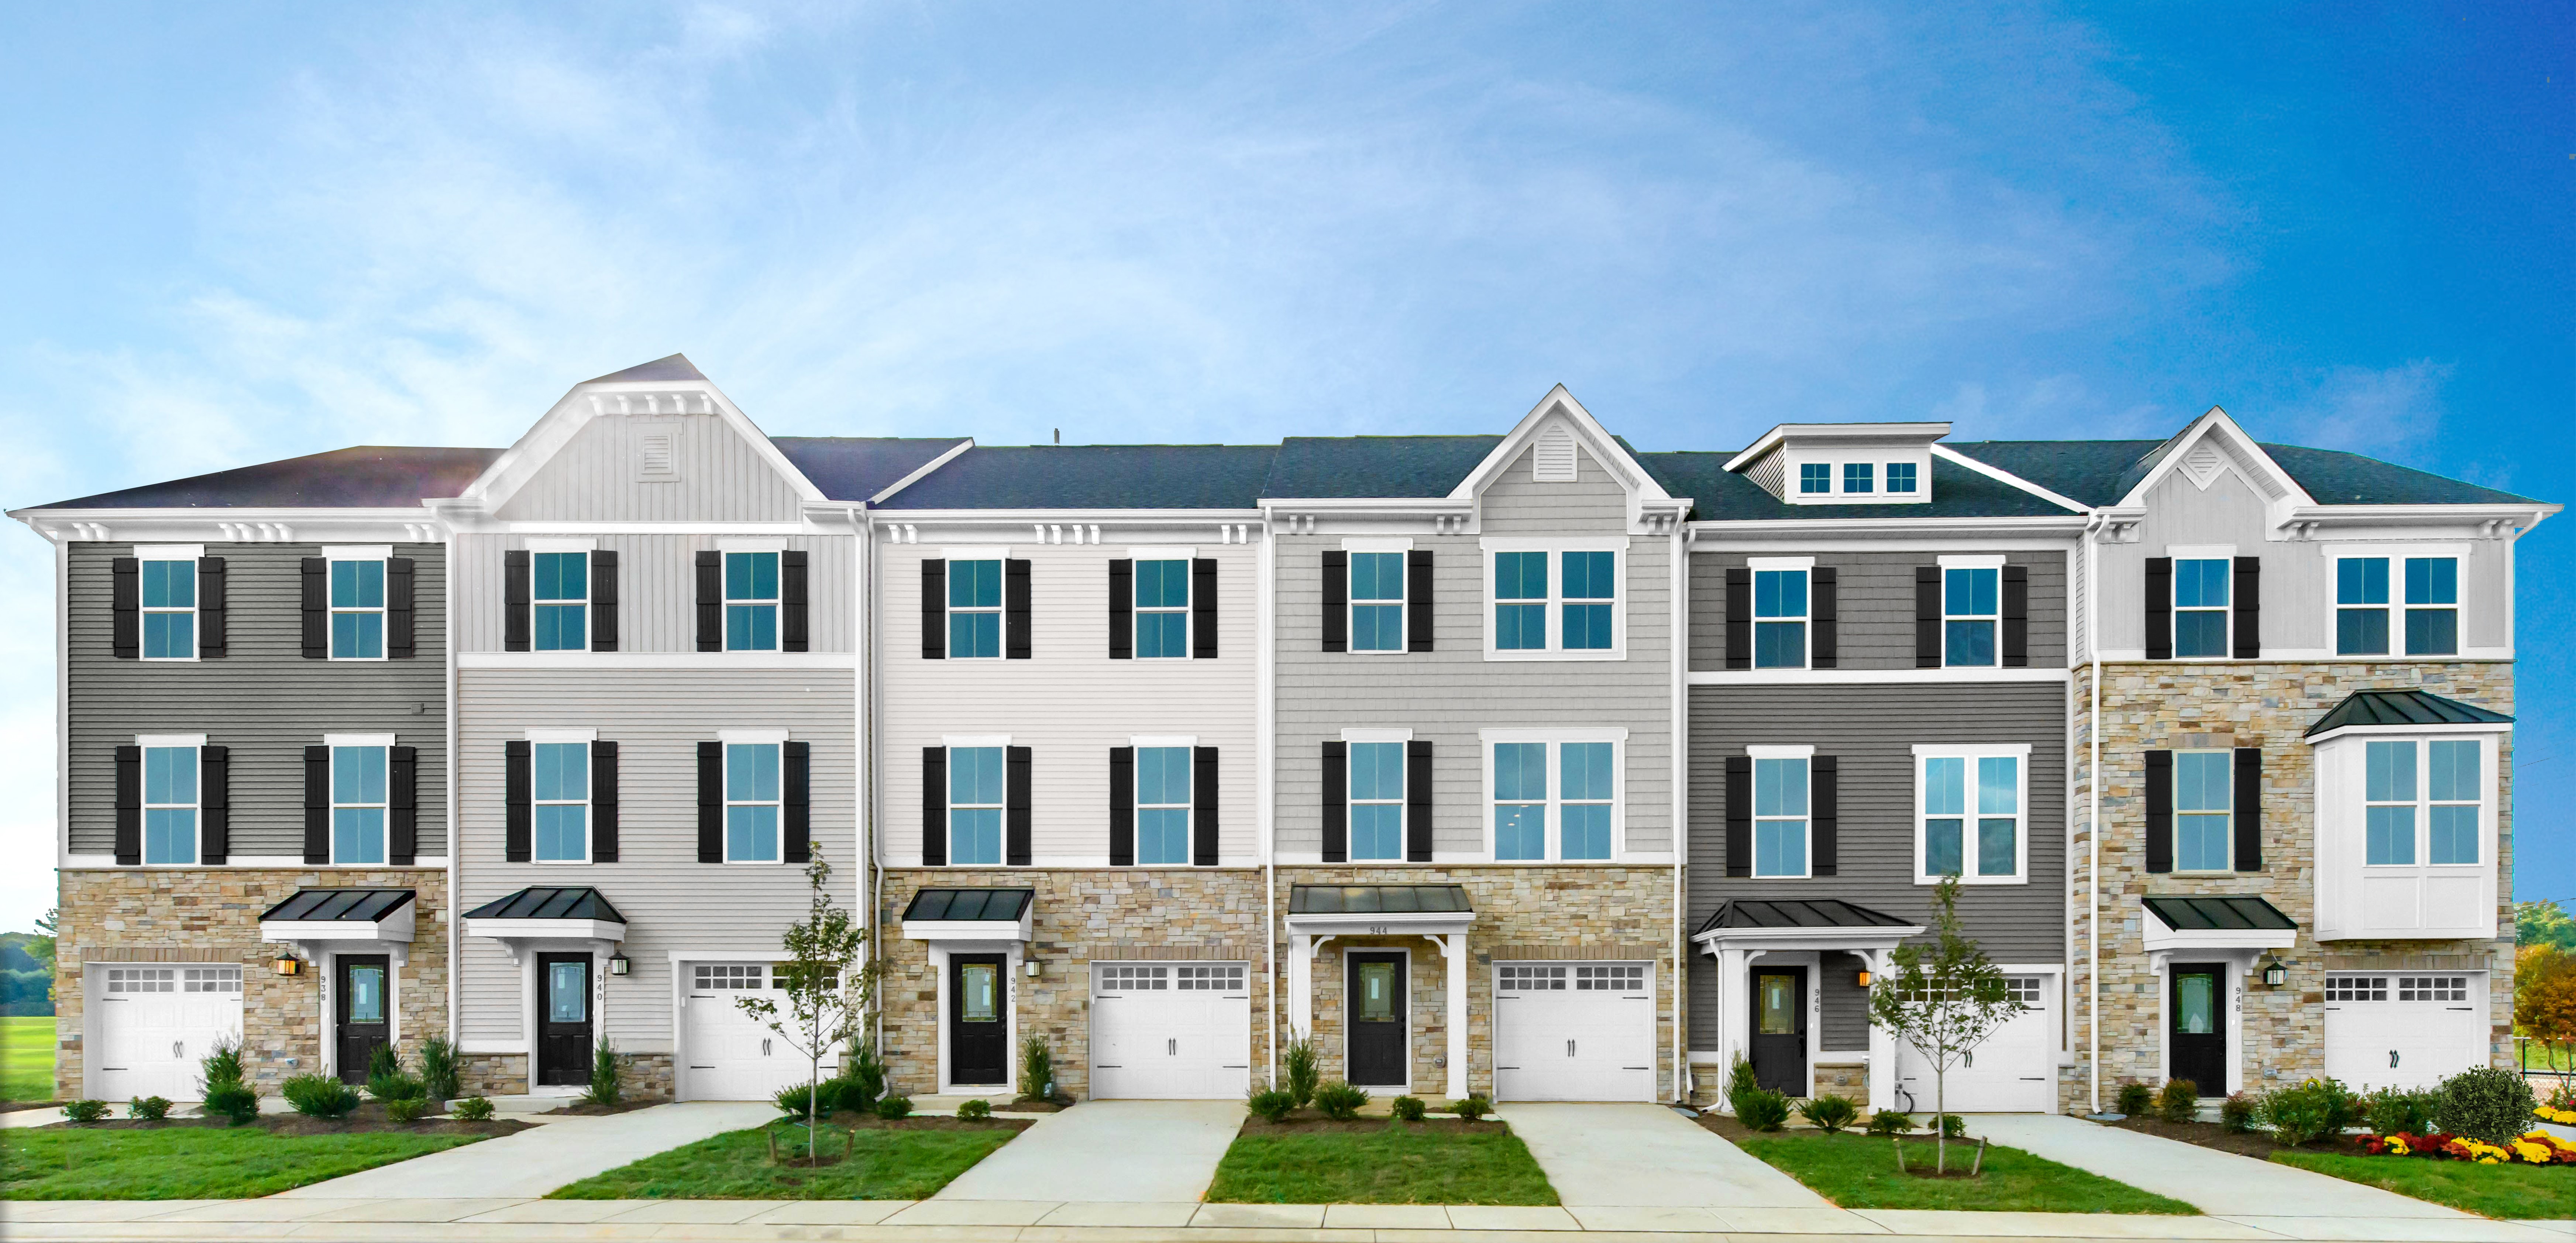 Strawberry Fields Townhomes for Sale | Ryan Homes